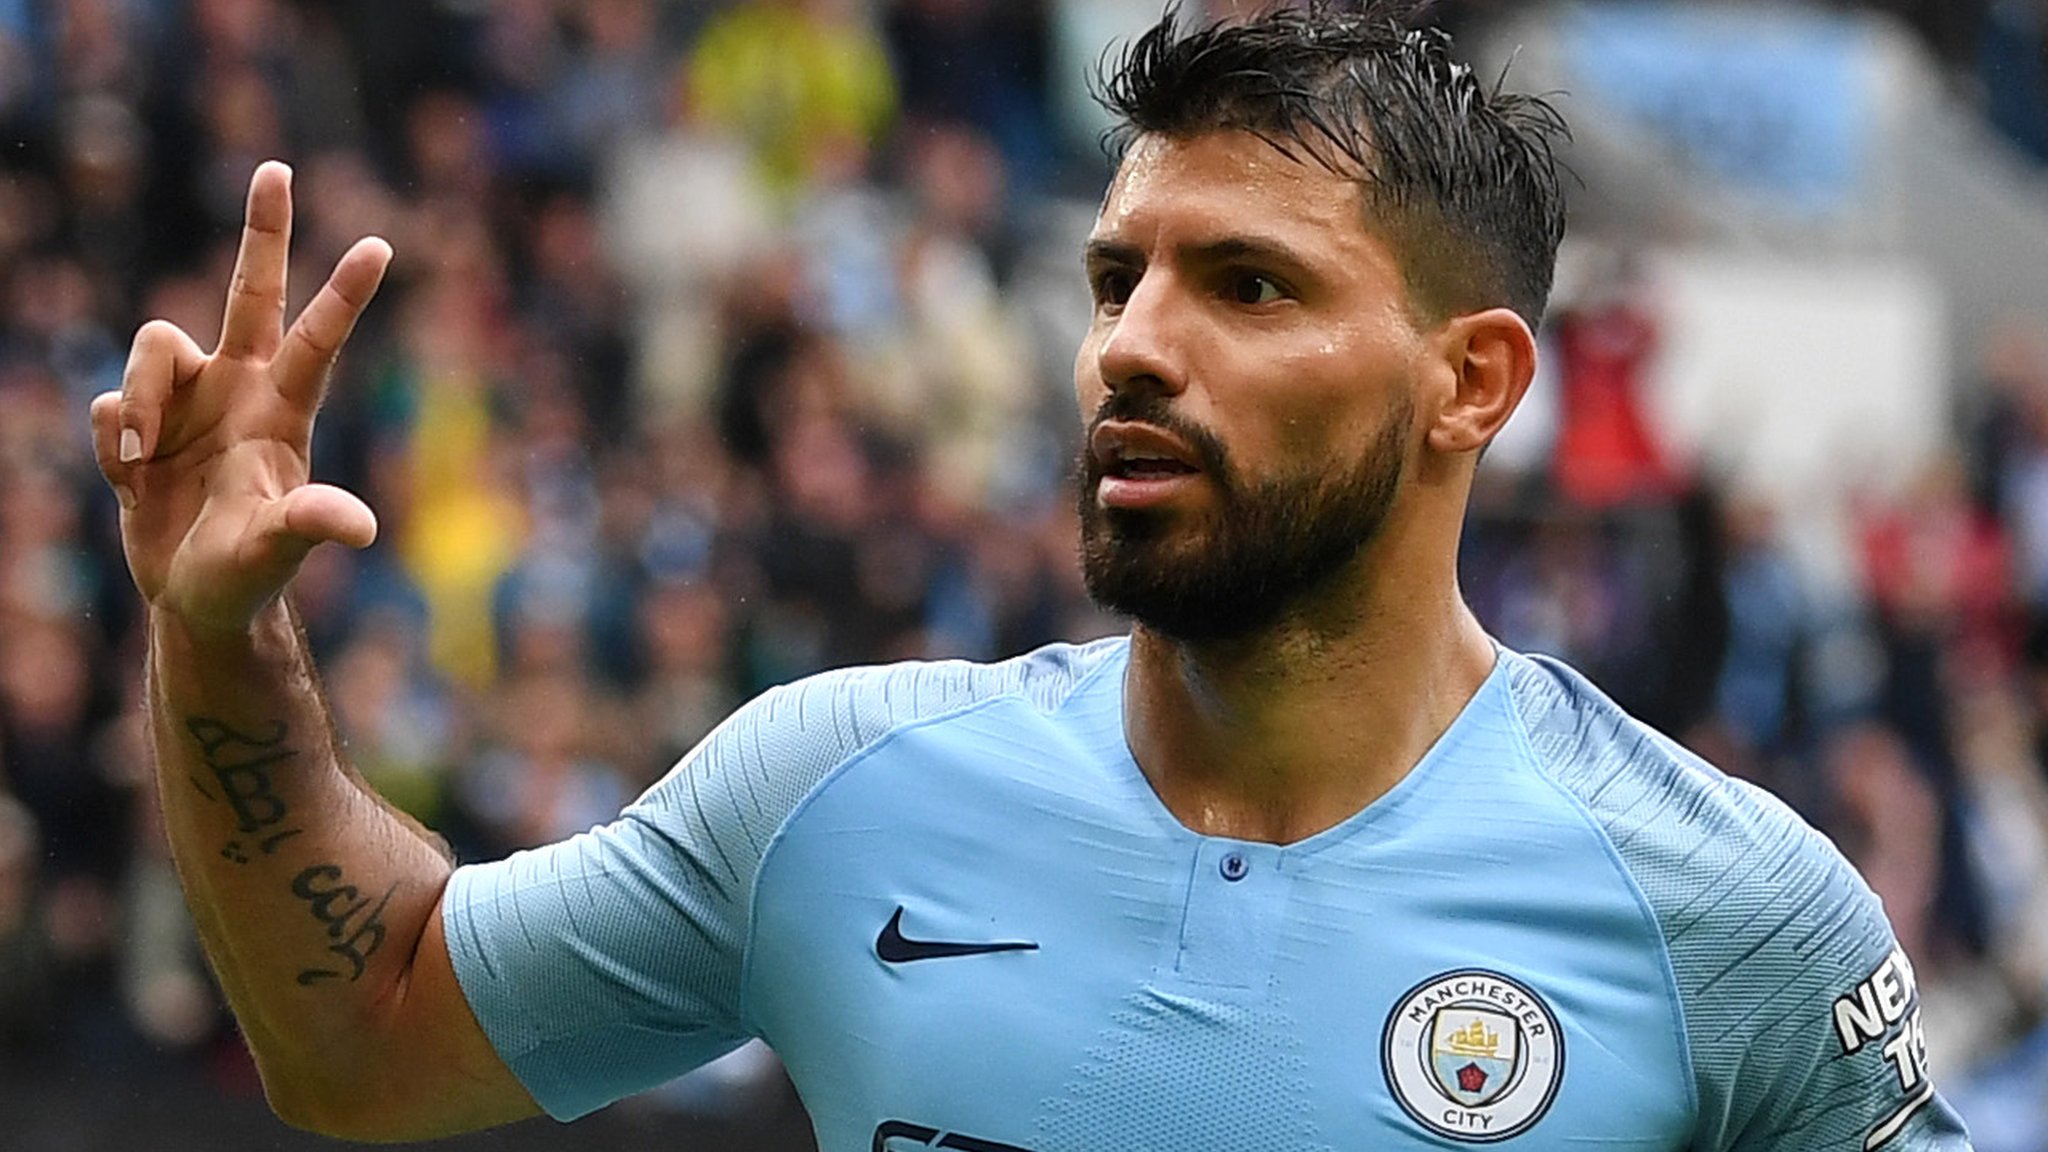 Aguero 'fitter than I've felt in years' after knee surgery